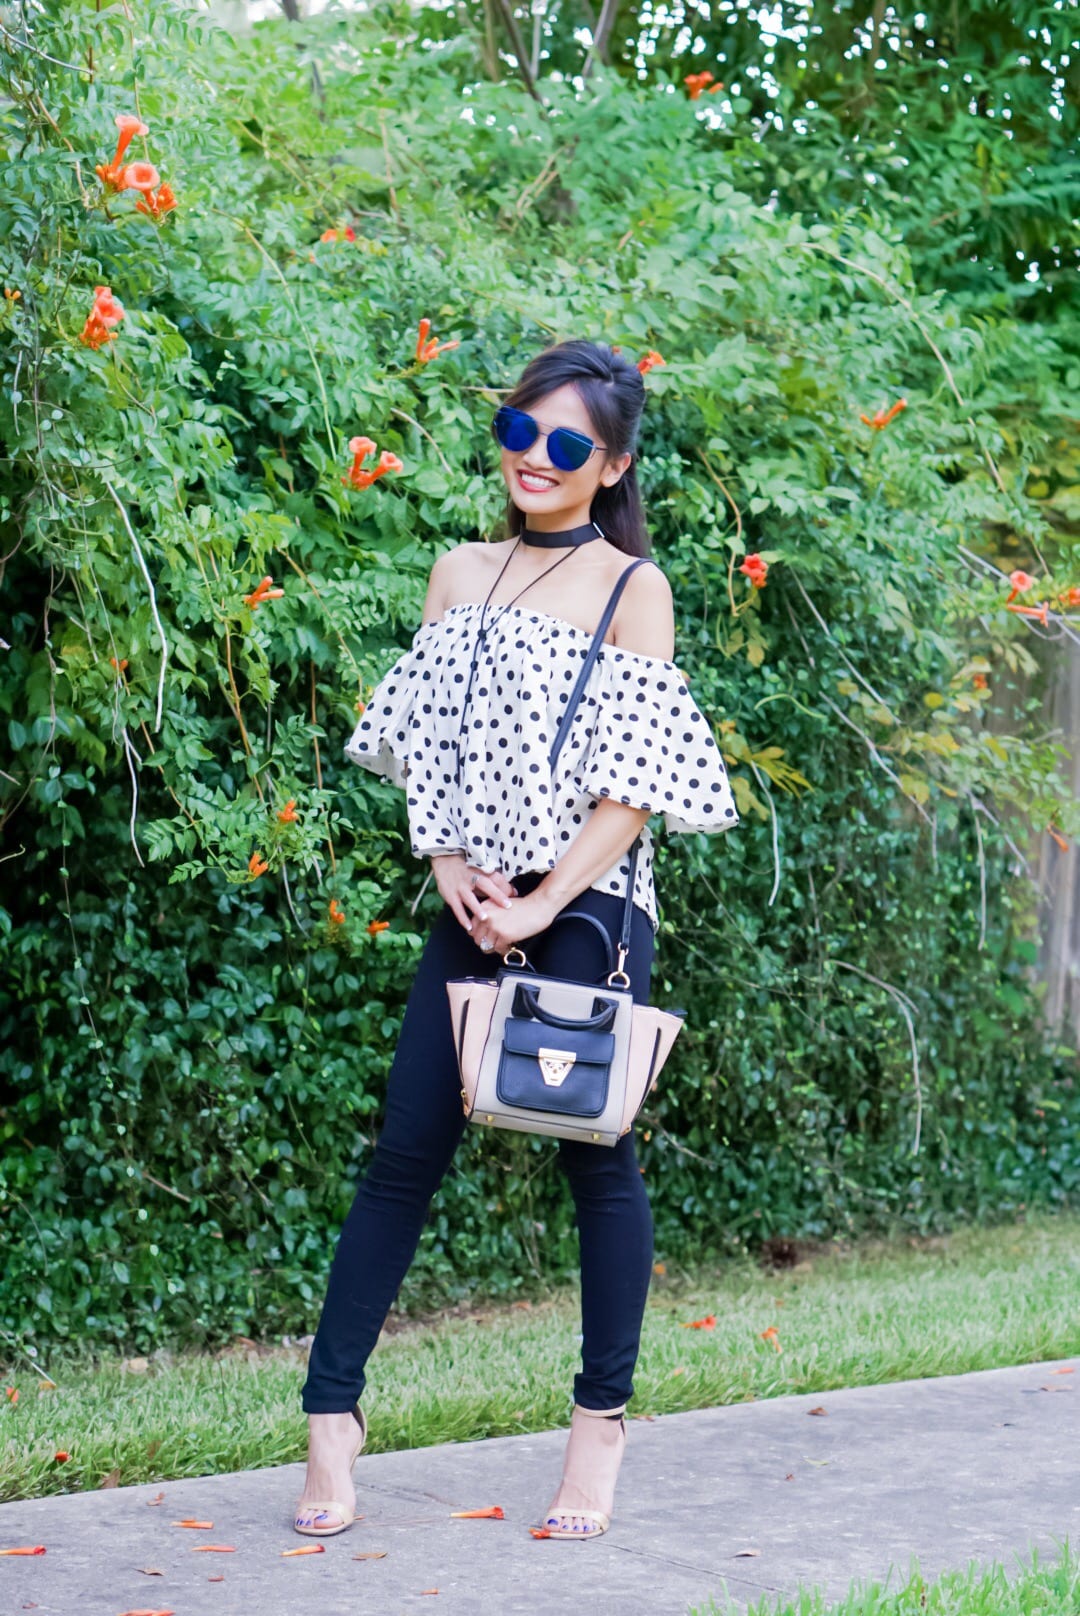 Blogging Photography Q&A, date night outfit, polka dots, off the shoulder tops.